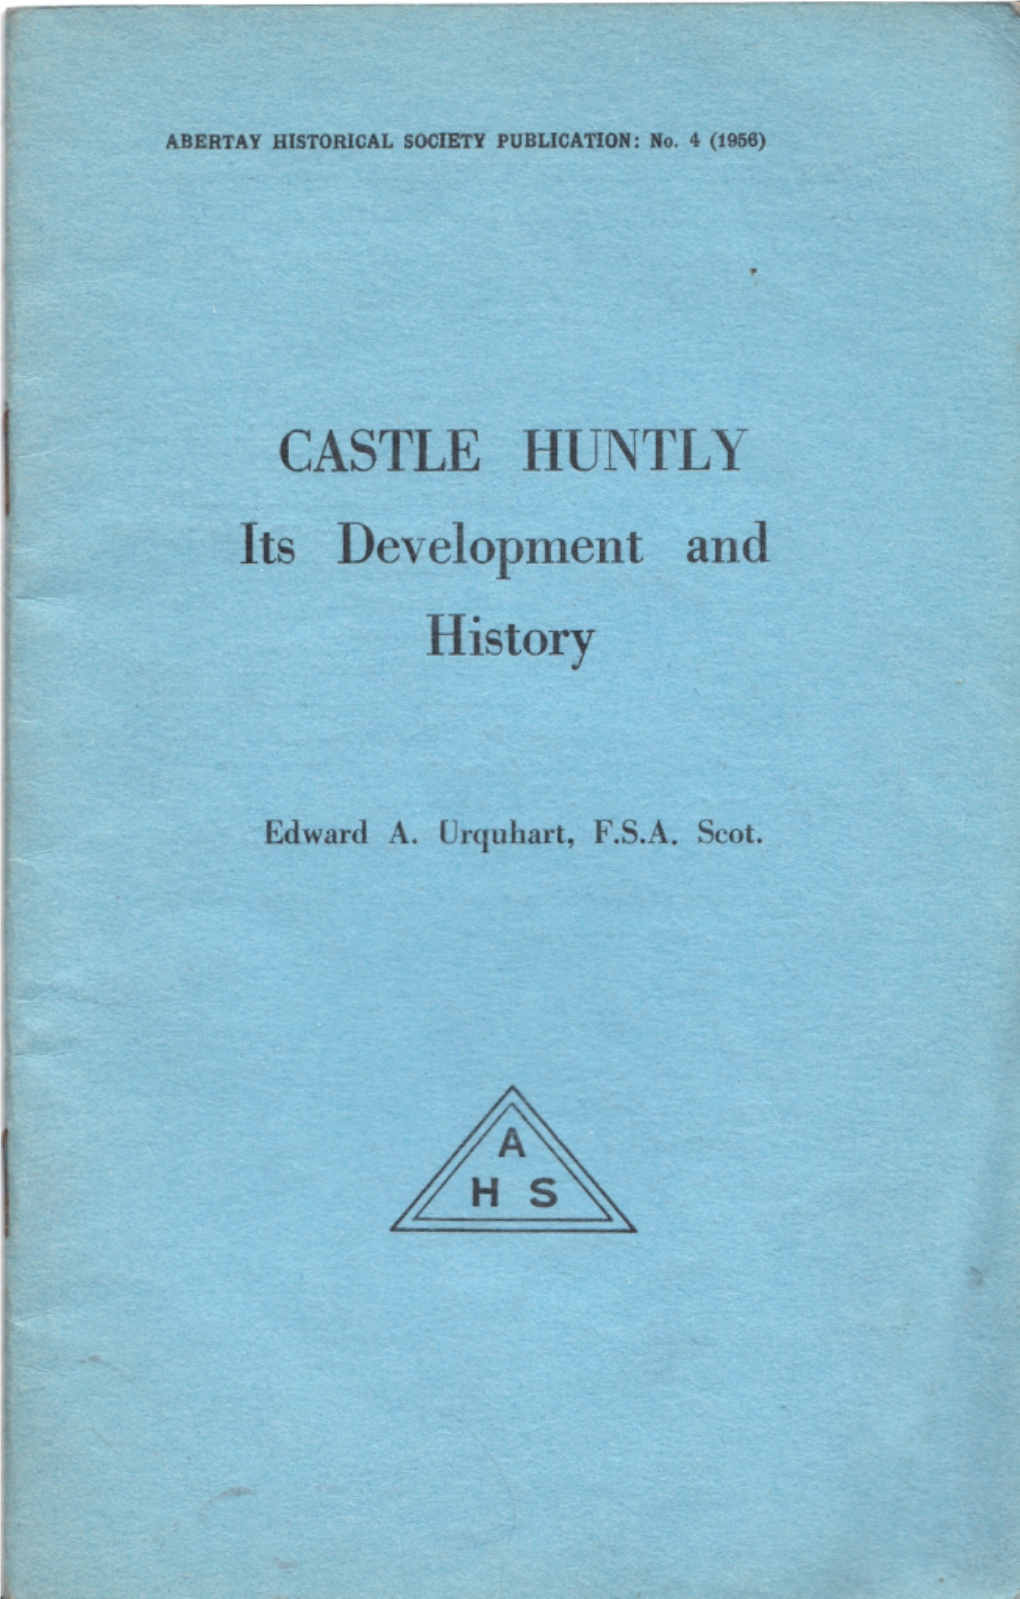 Castle Huntly: Its Development and History